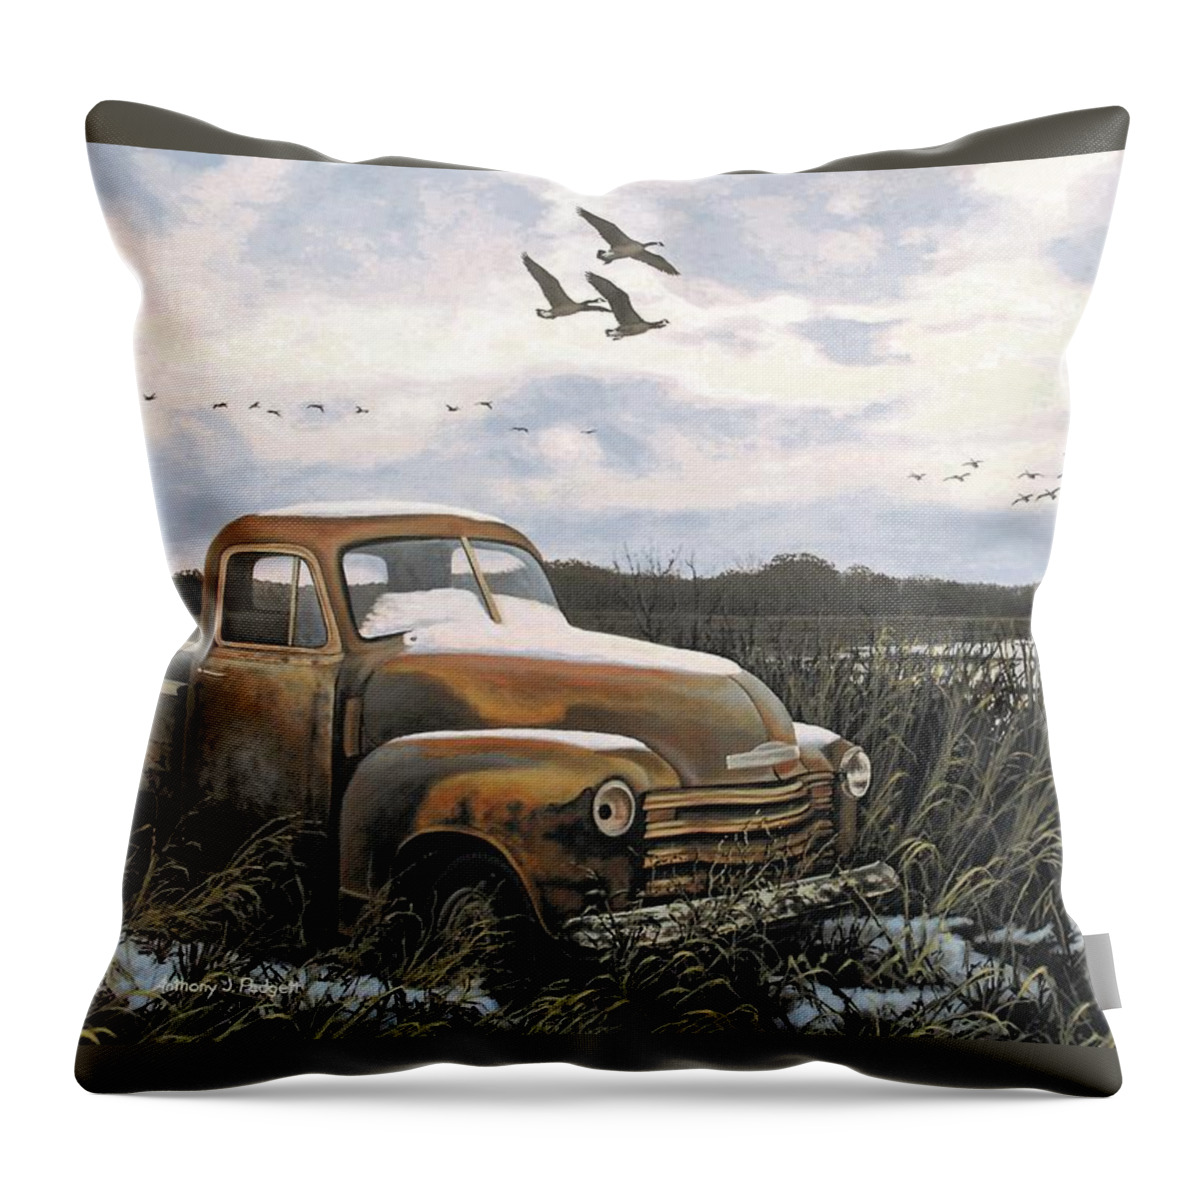 Truck Throw Pillow featuring the painting Grandpa's Old Truck by Anthony J Padgett